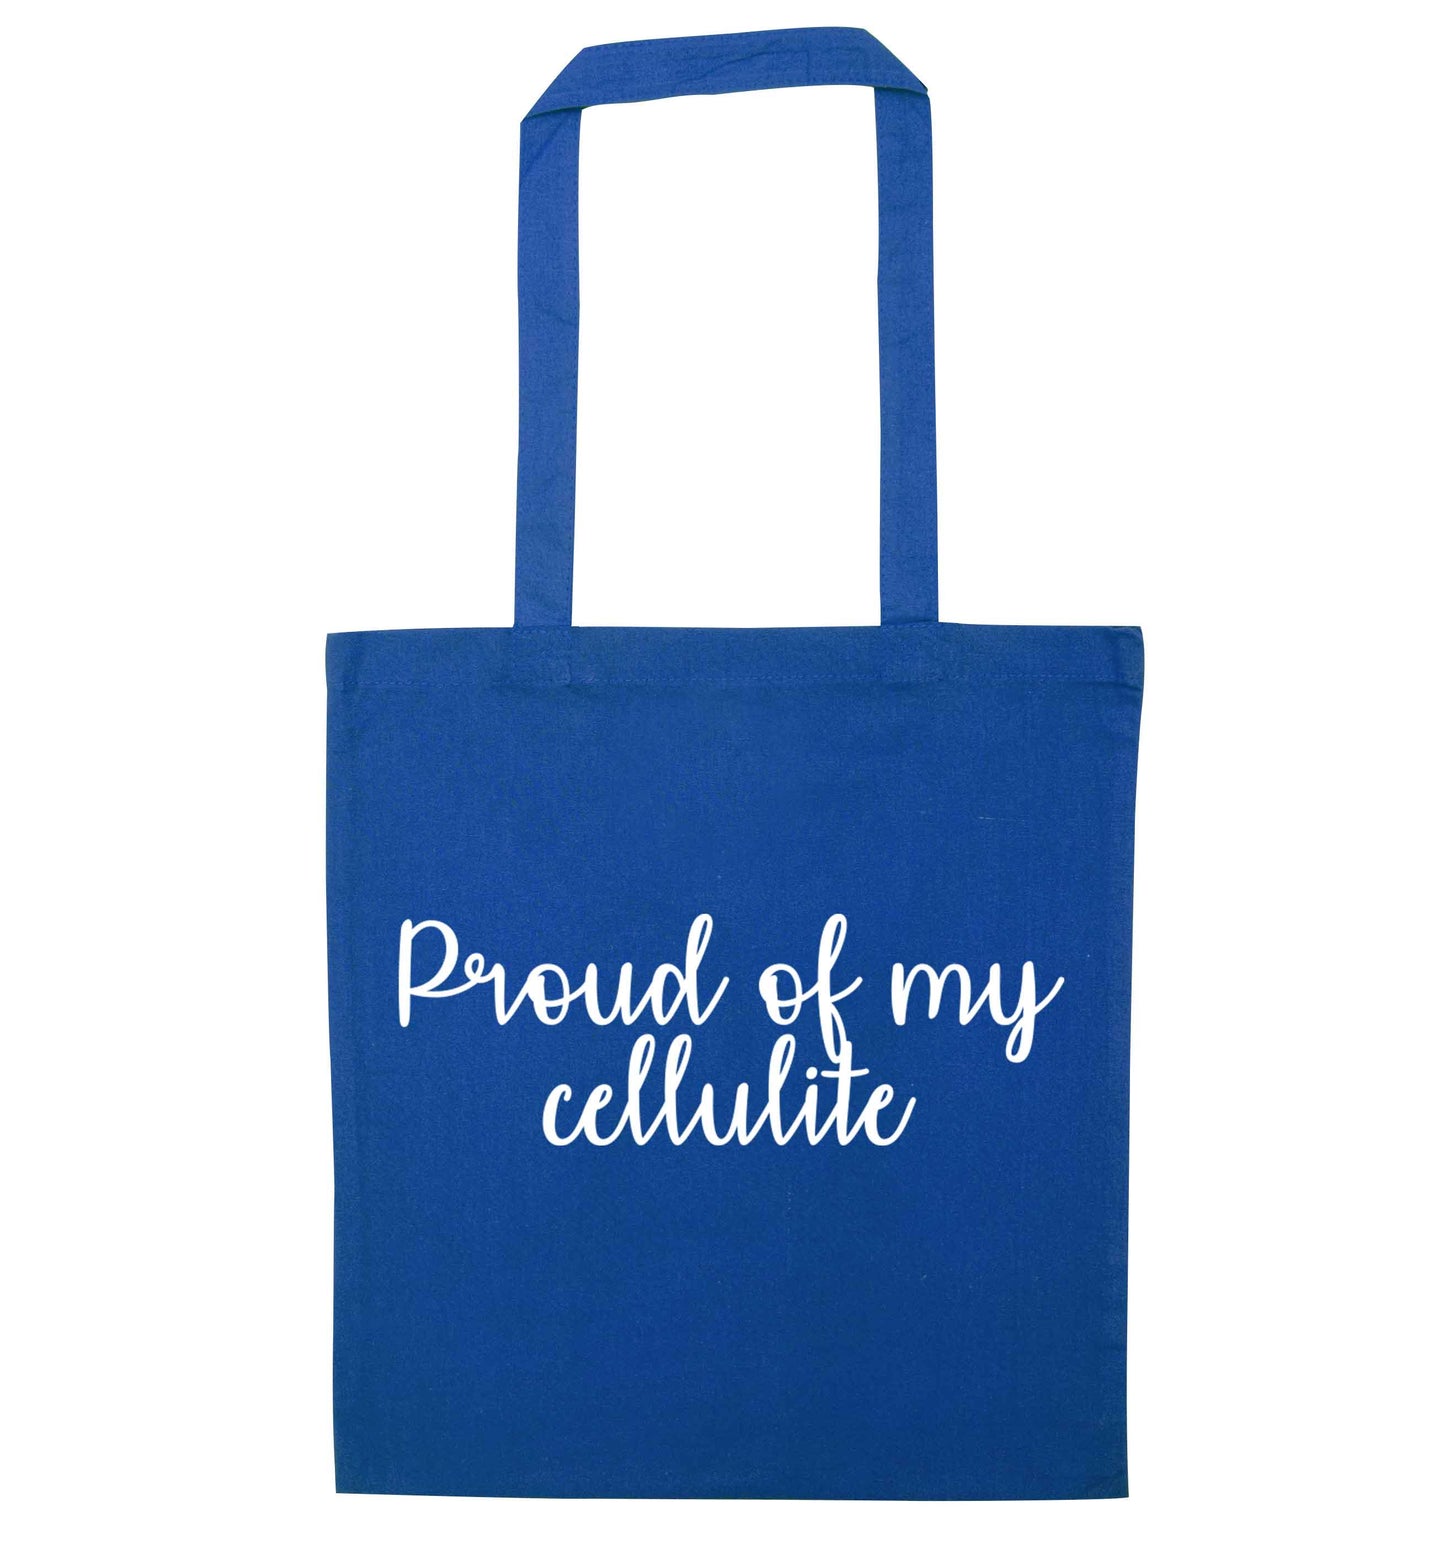 Proud of my cellulite blue tote bag